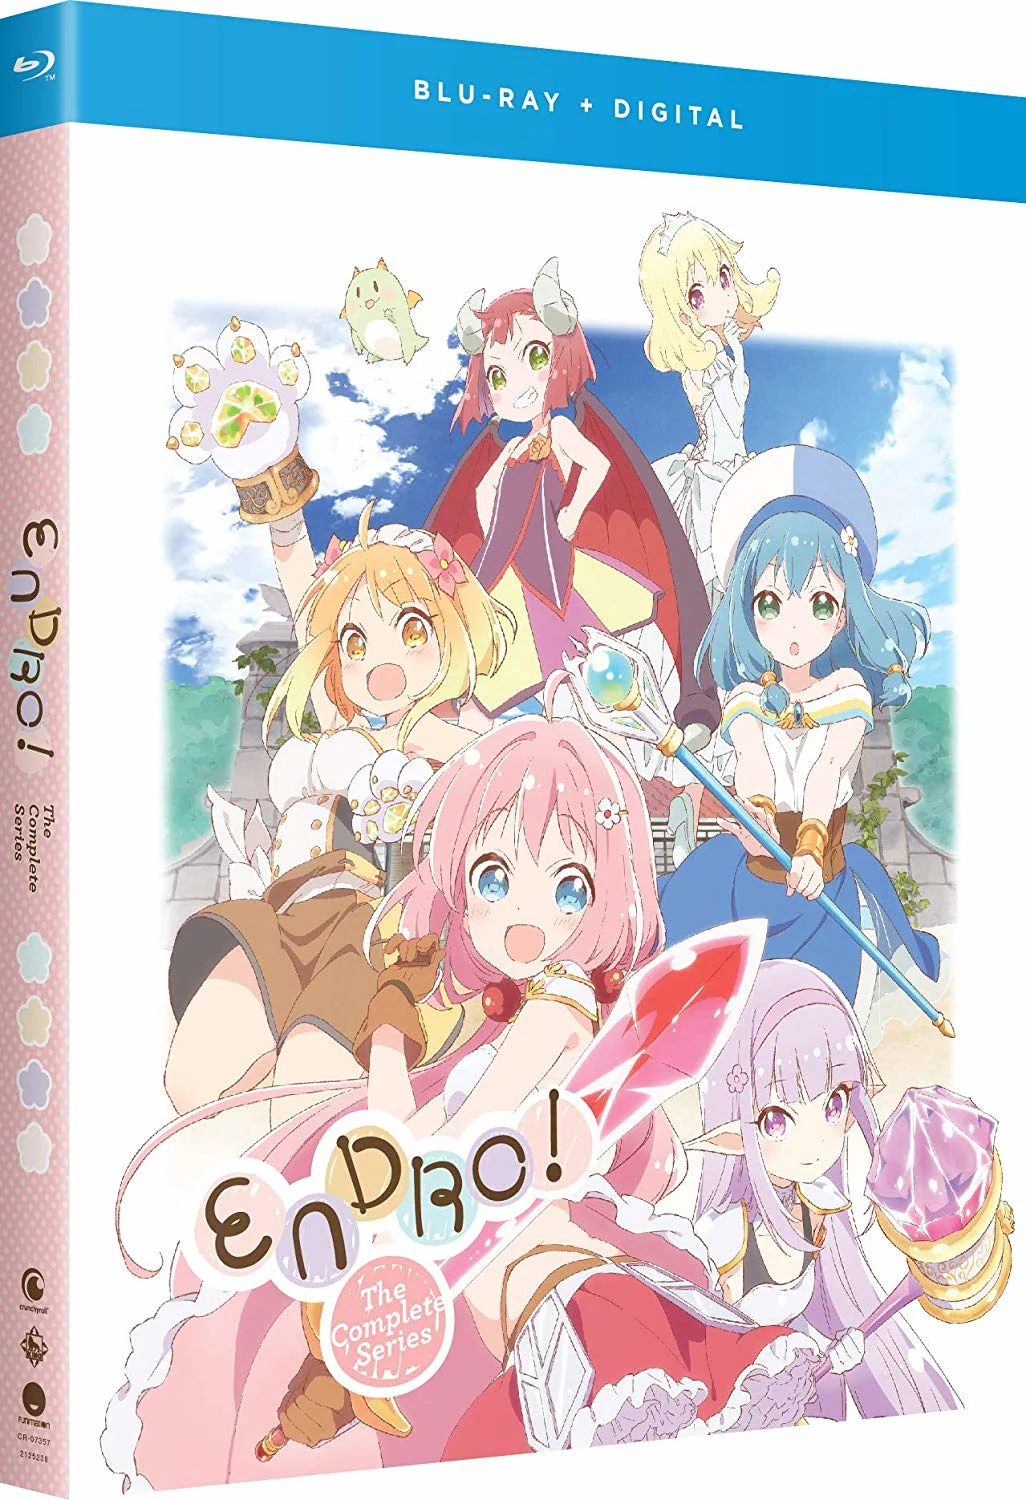 ENDRO!: The Complete Series (Blu-ray)